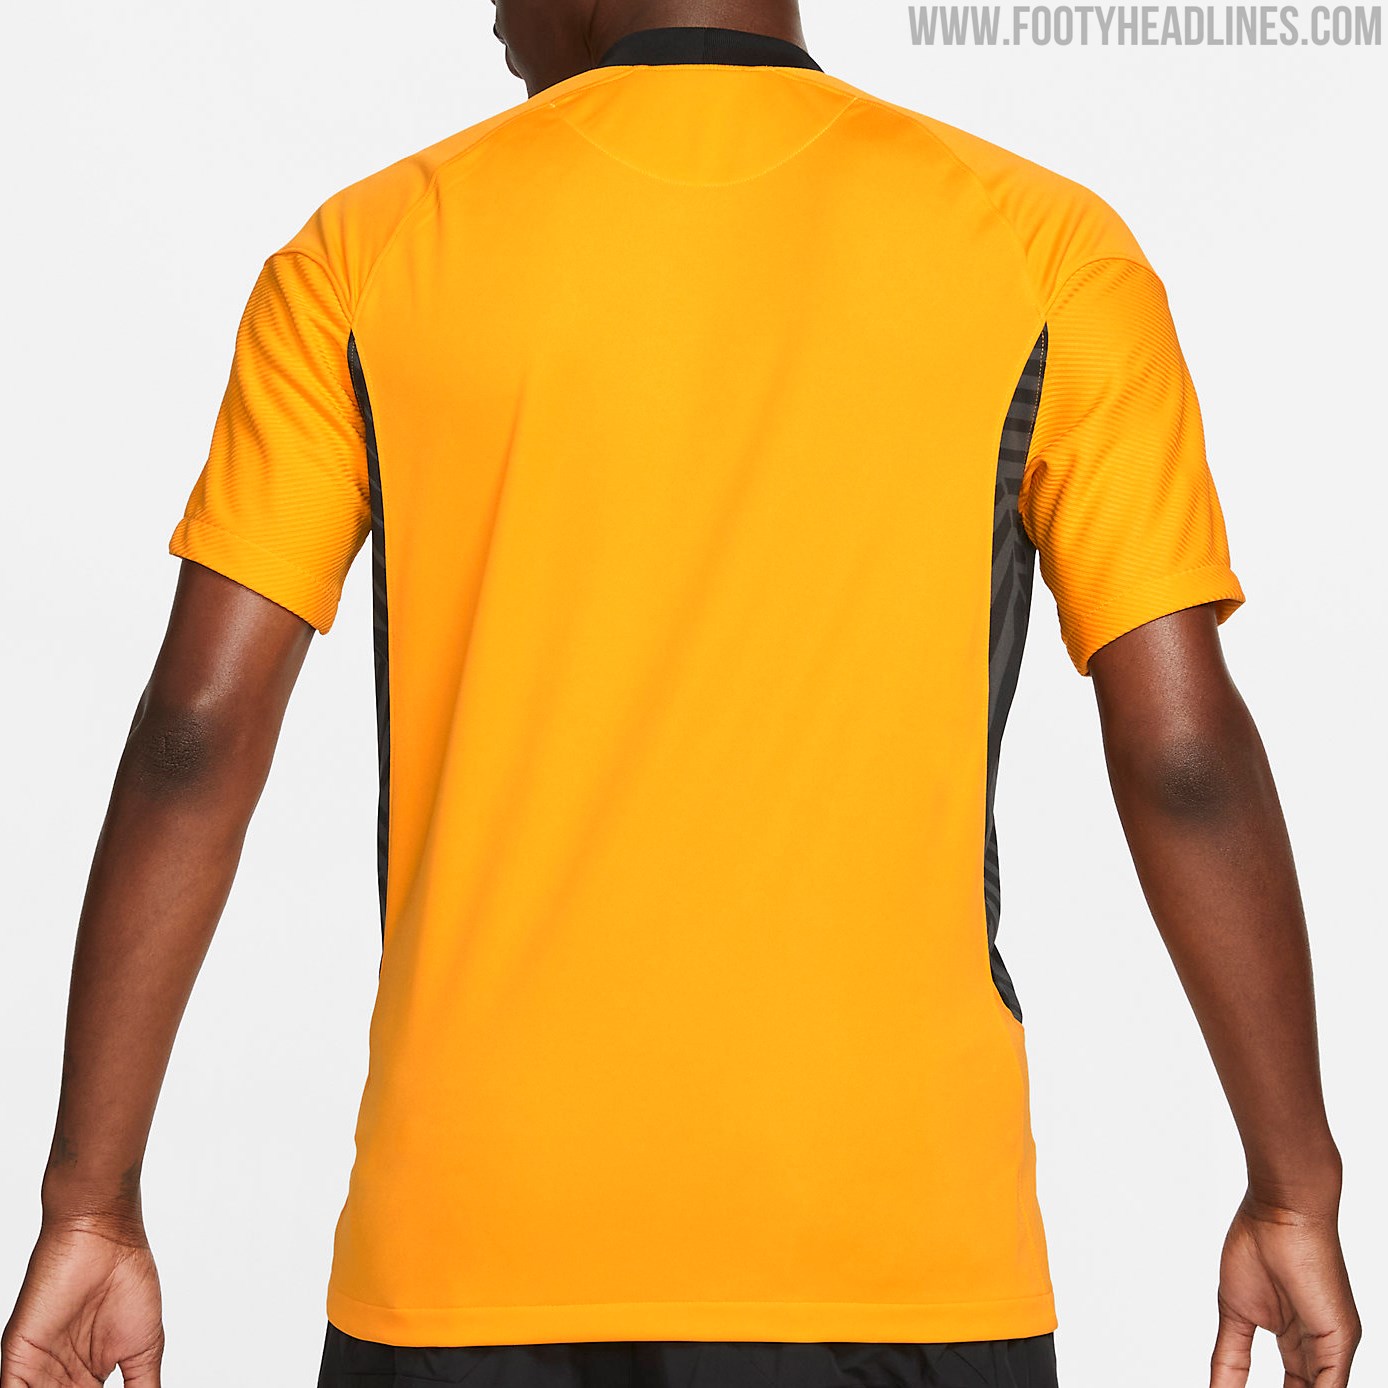 Kaizer Chiefs 21-22 Home & Away Kits Released - Footy Headlines